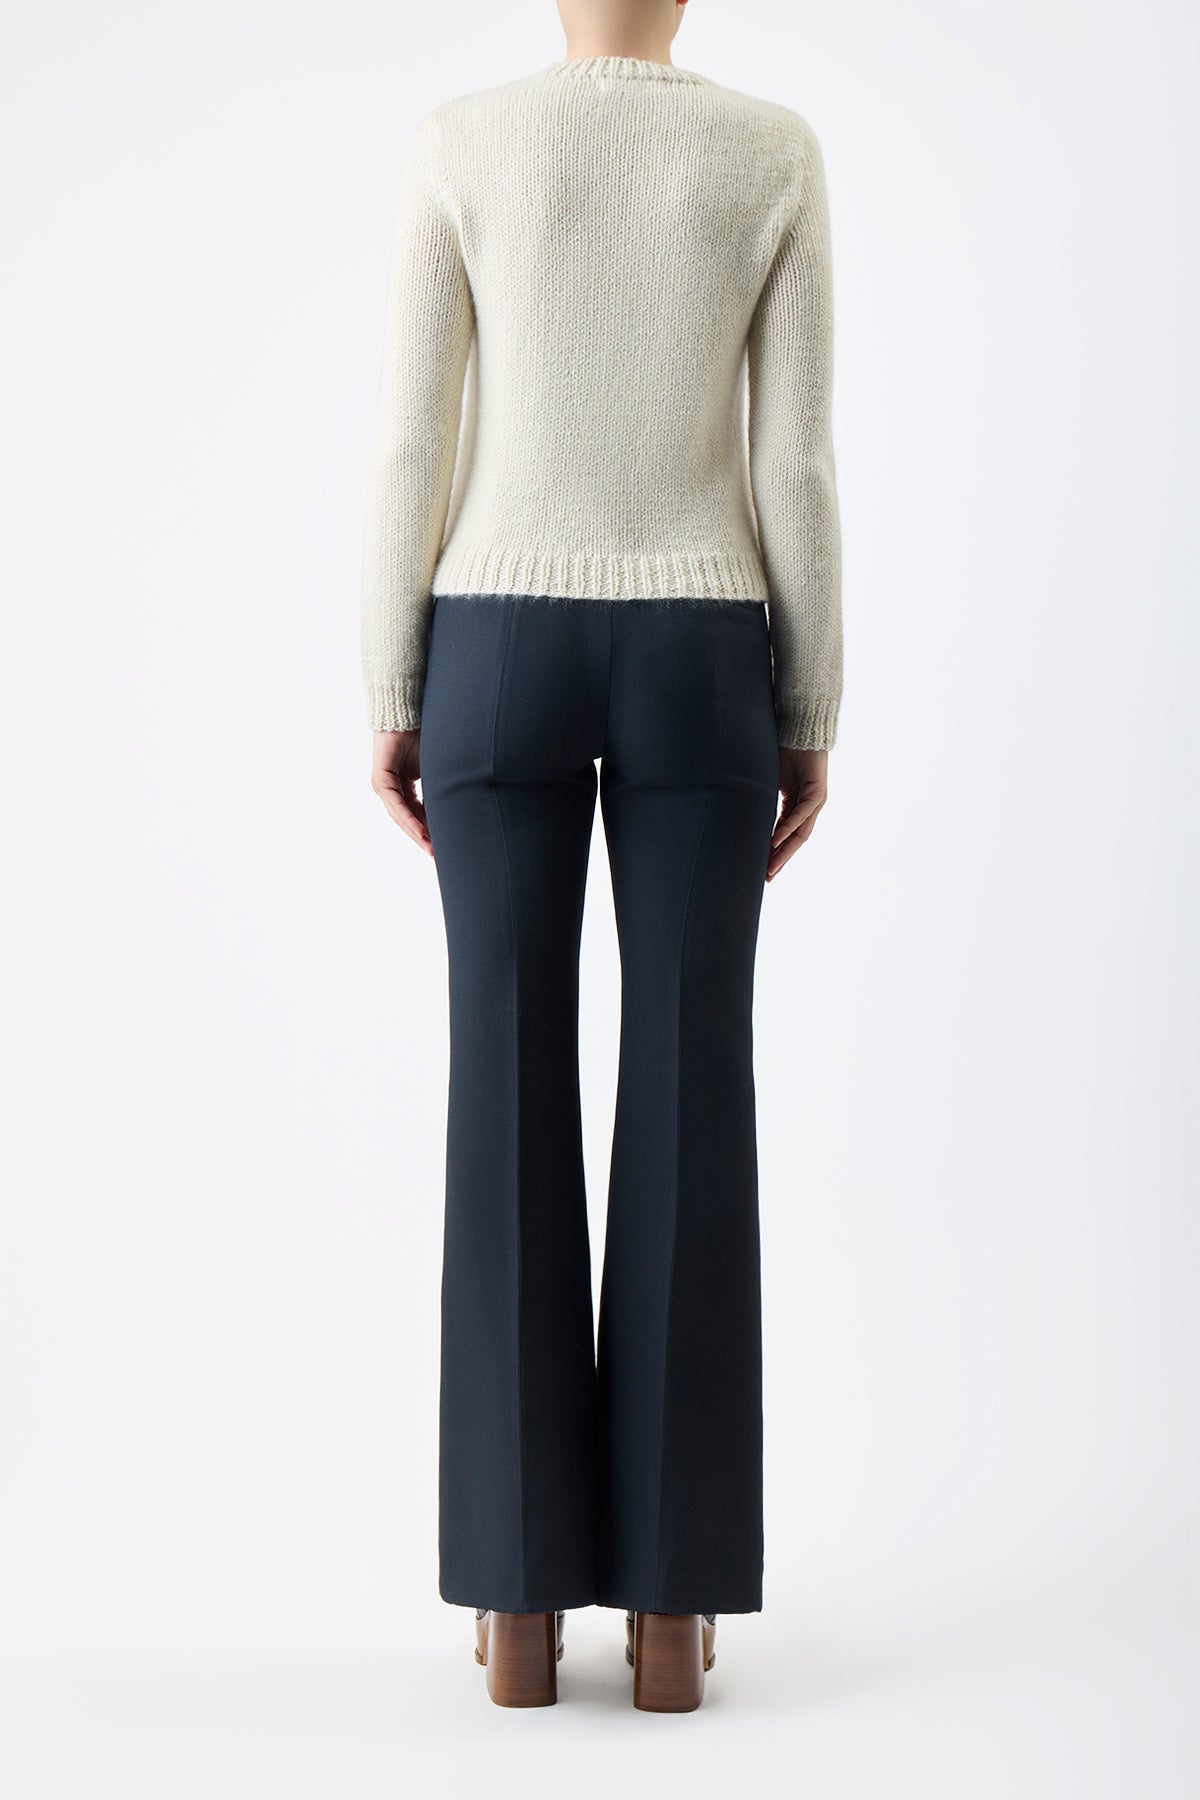 Rhun Knit Sweater in Ivory Cashmere